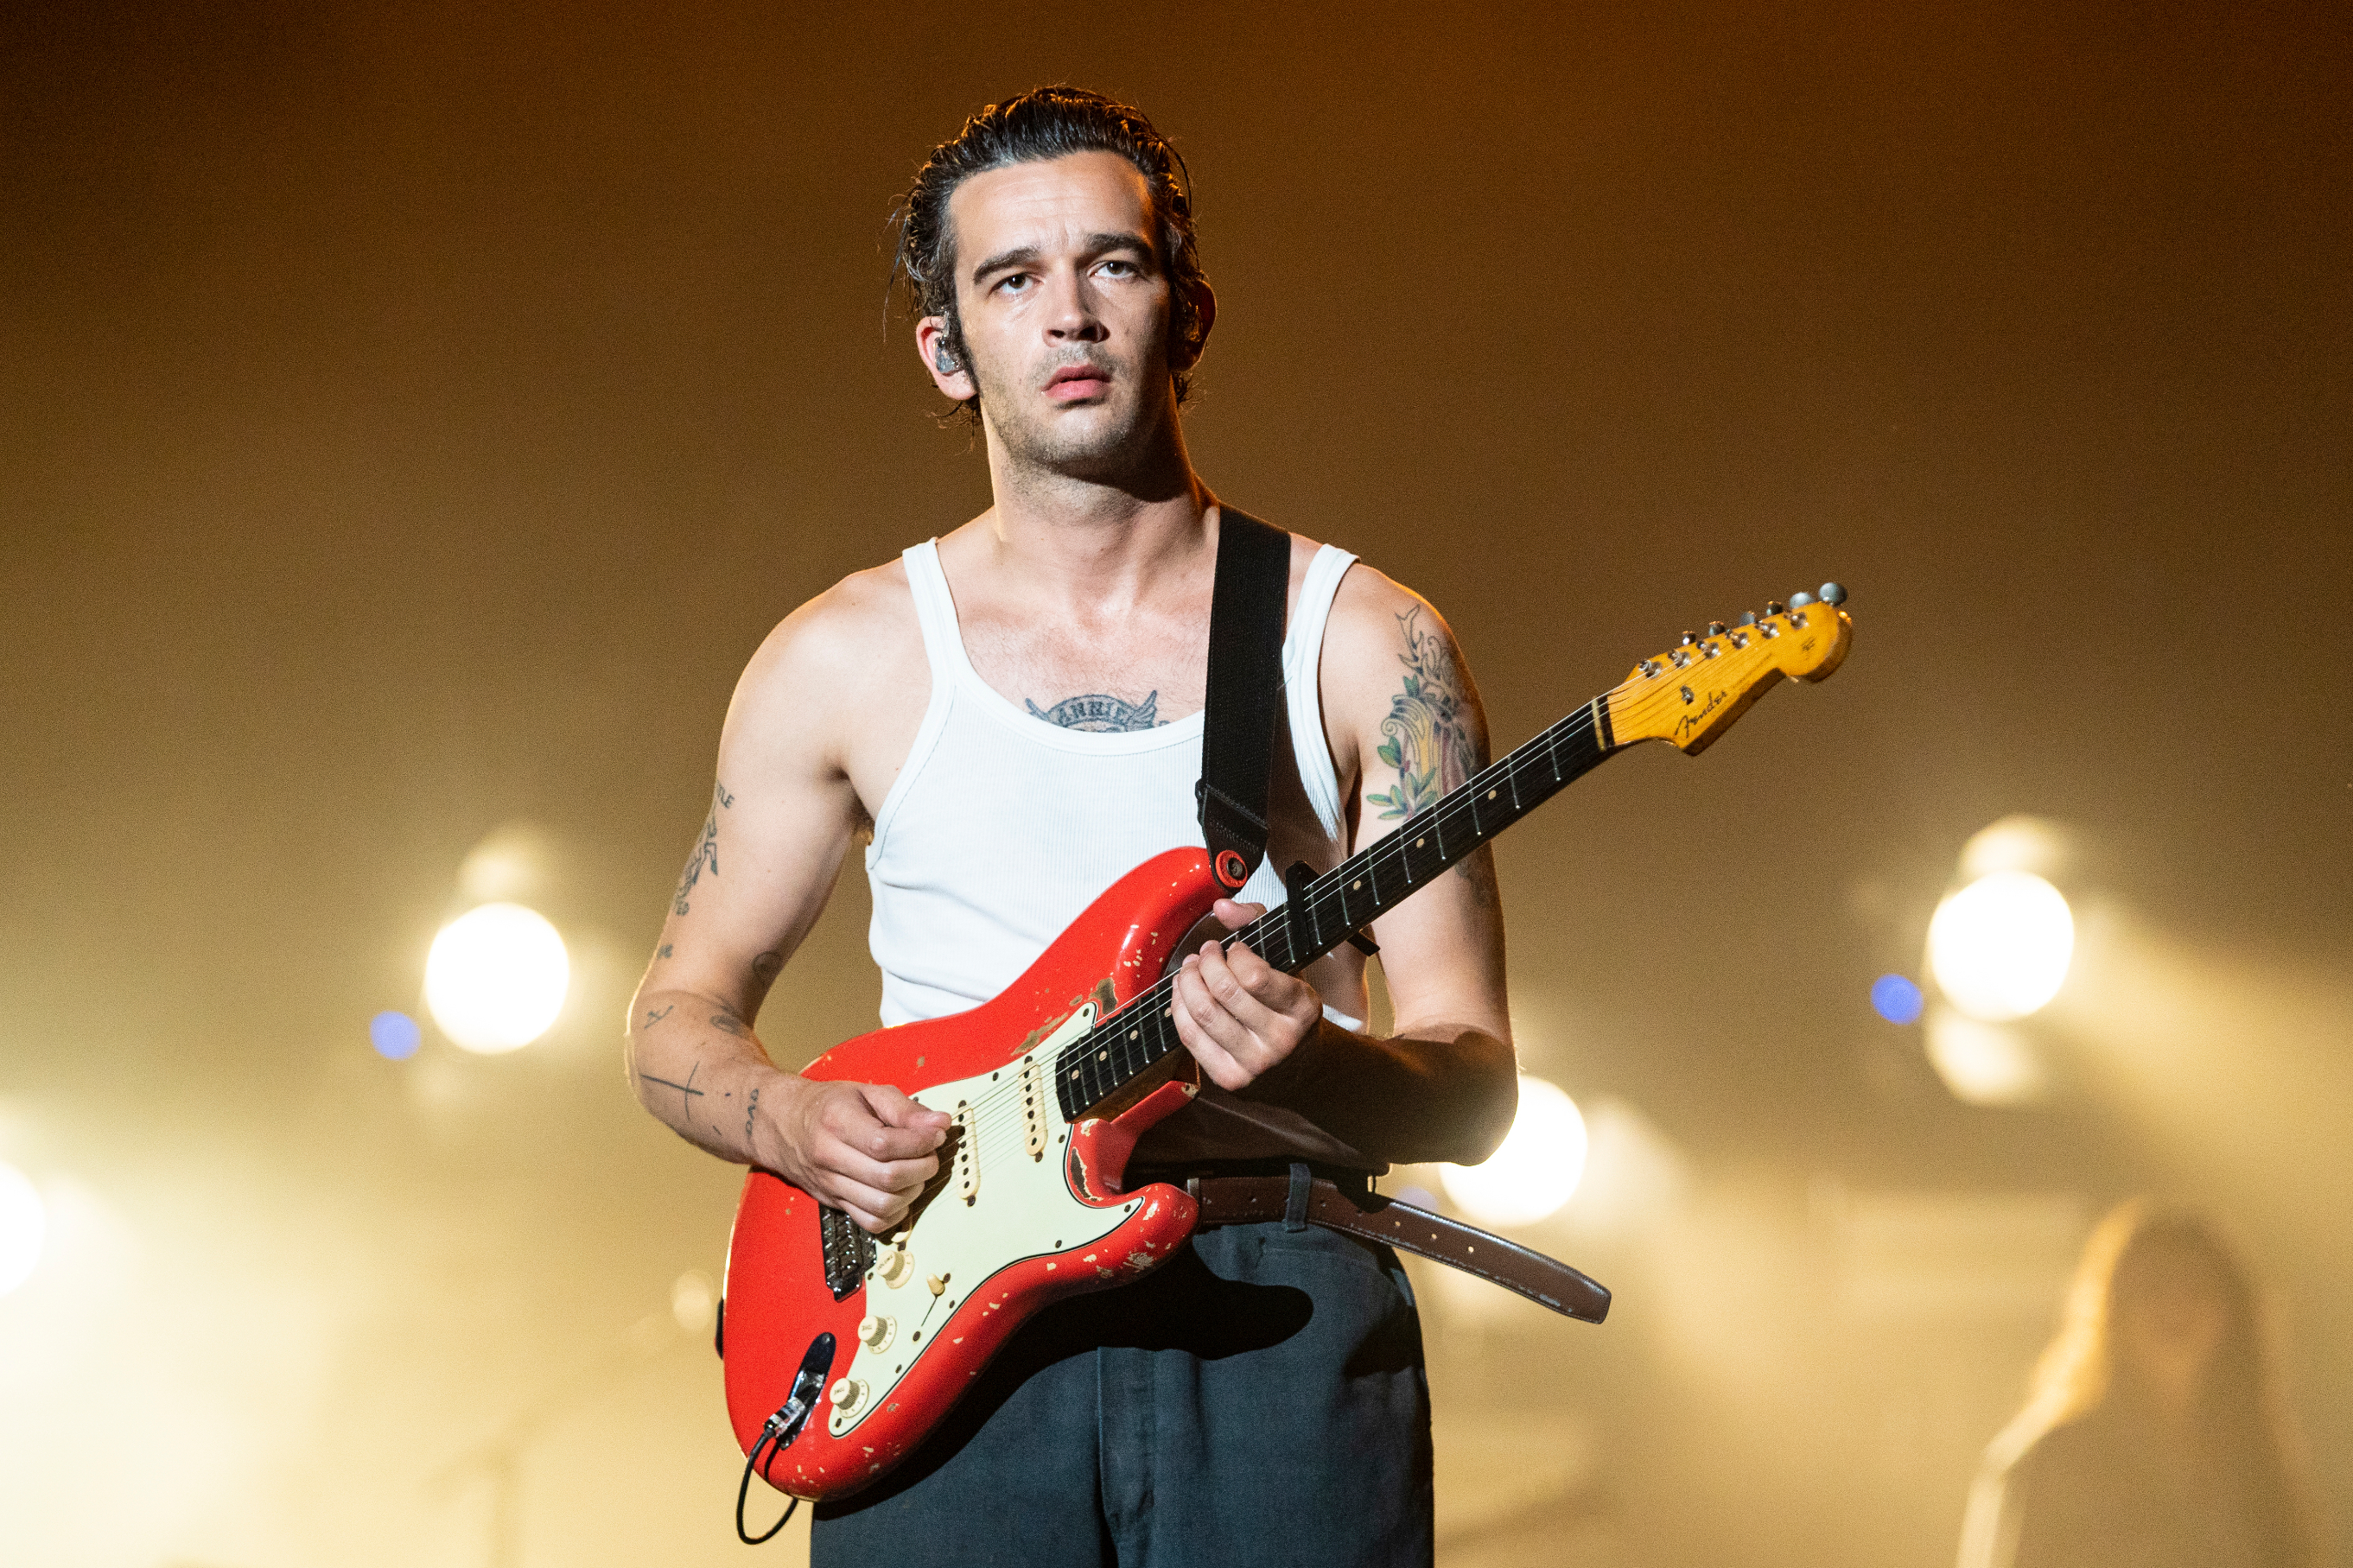 matty playing guitar on stage